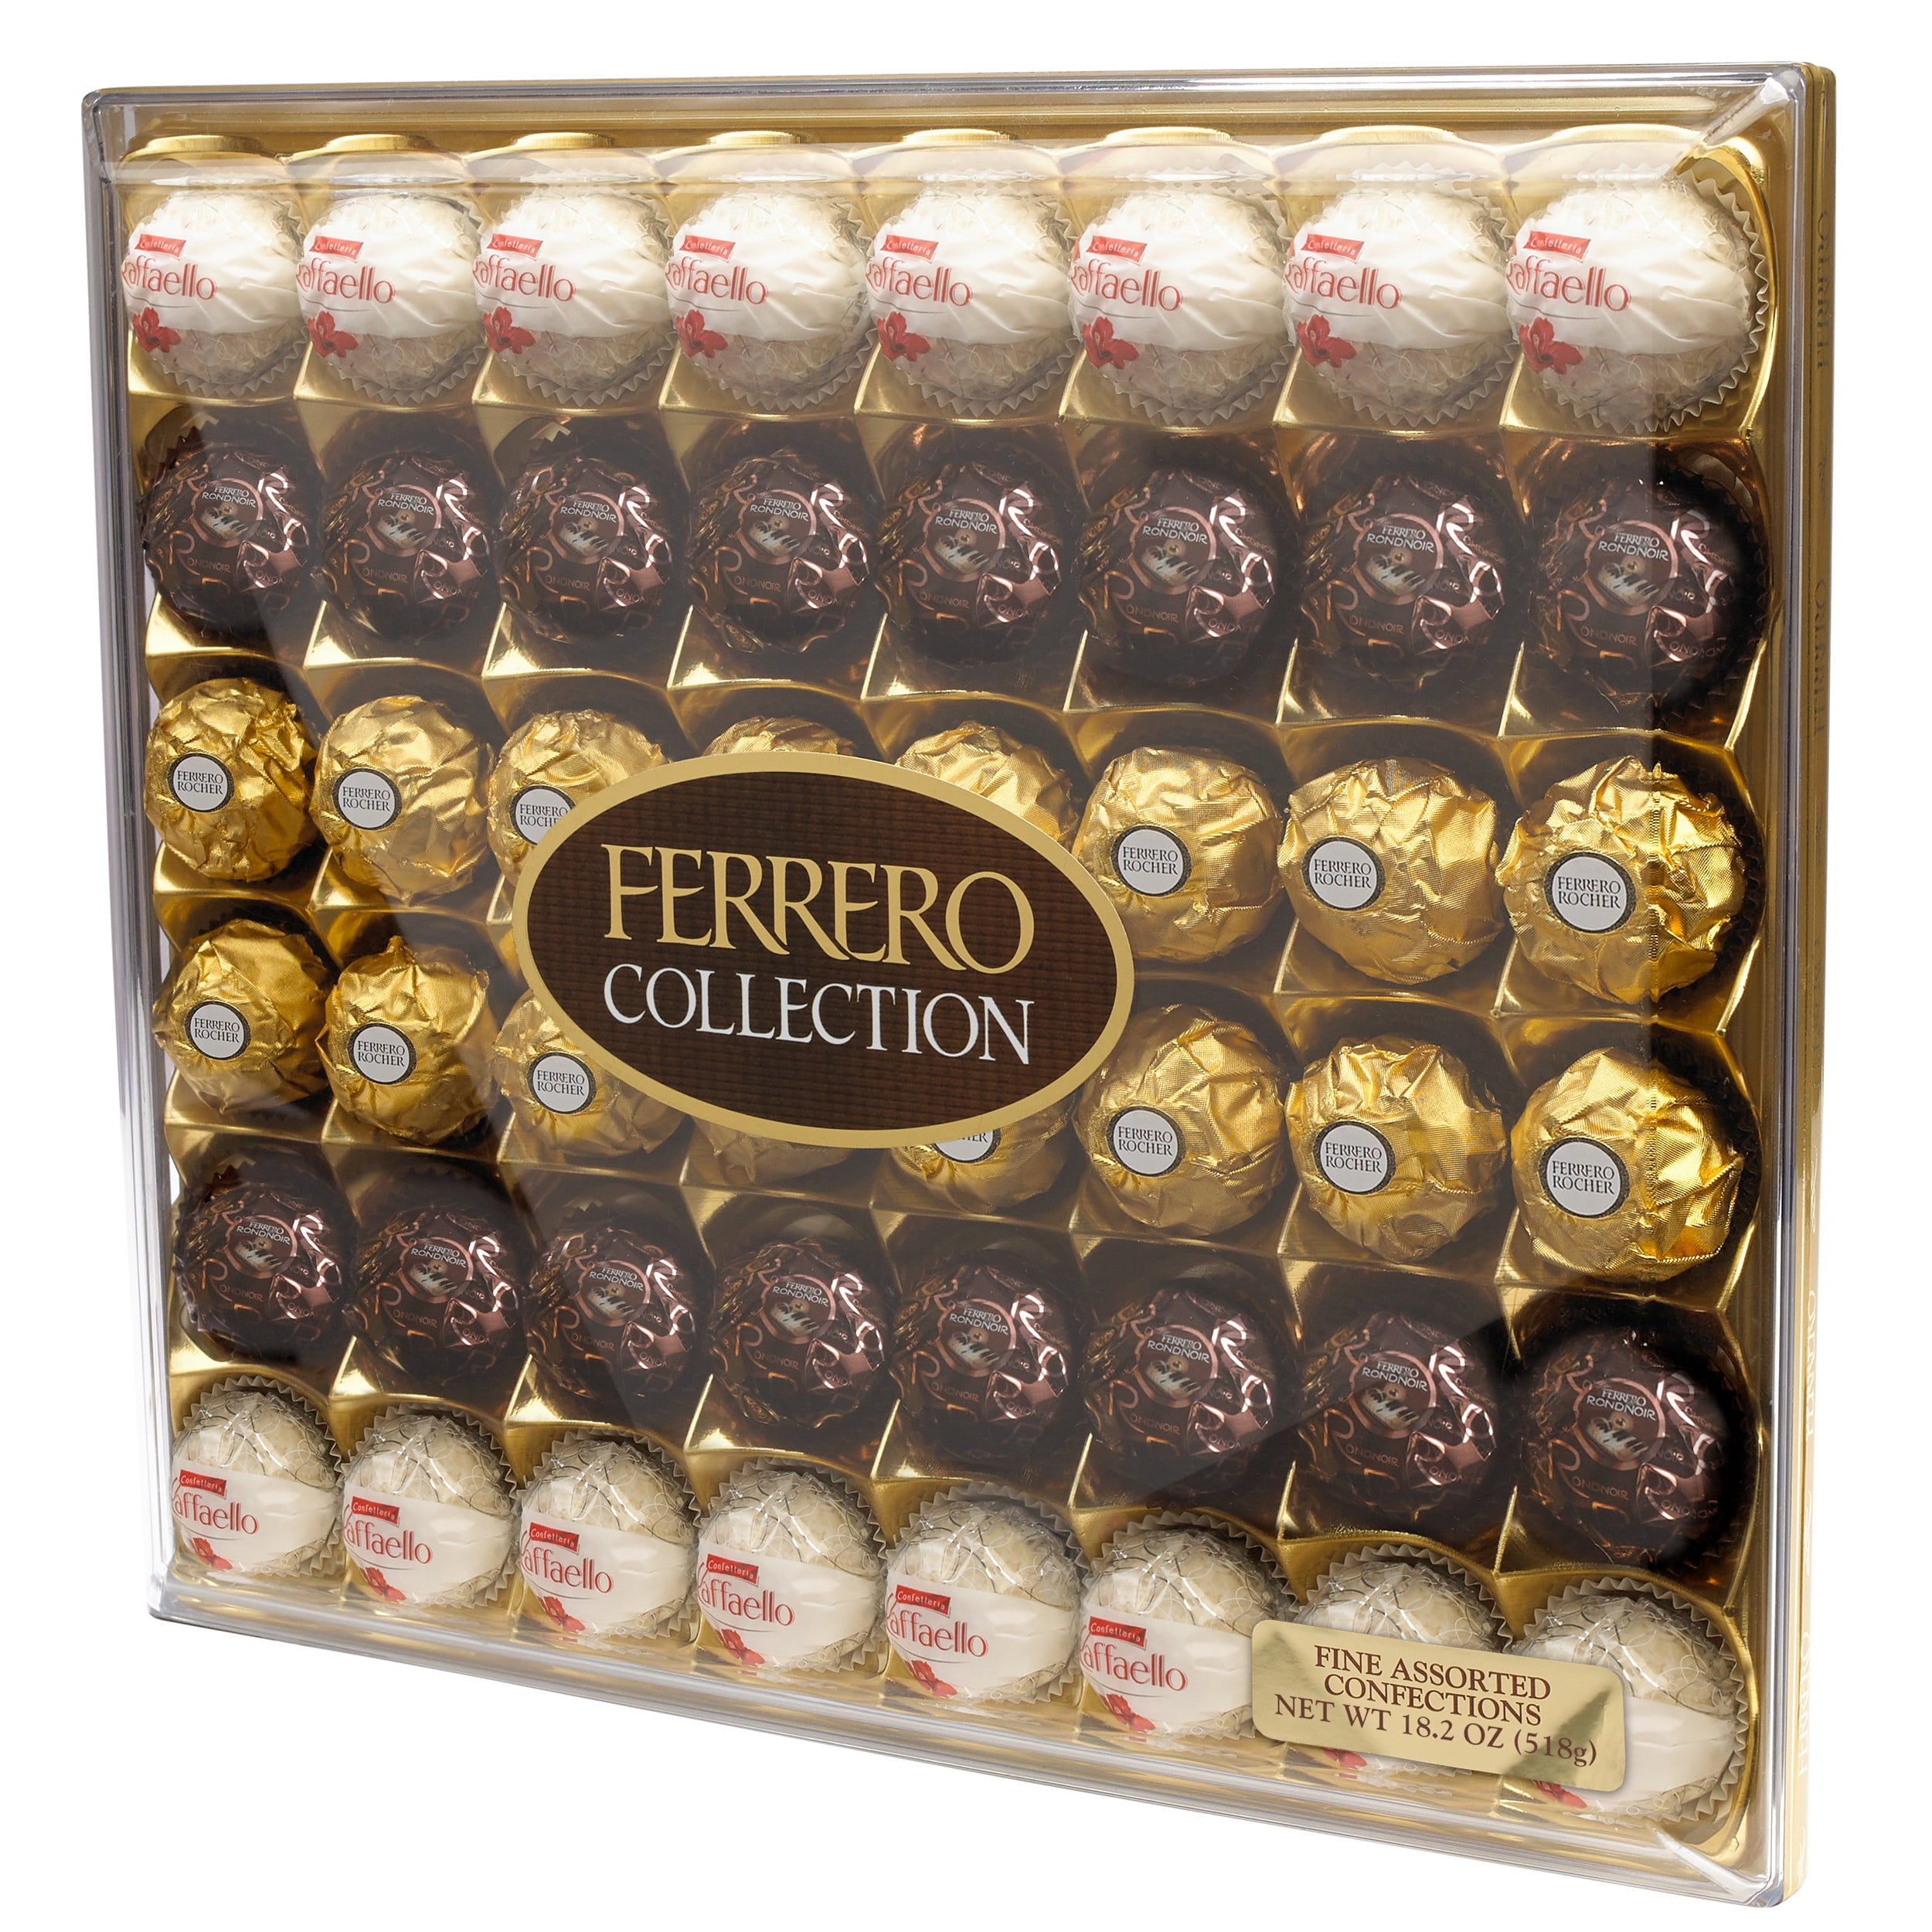 Chocolate Ferrero Gourmet A Gift, Milk Collection 48 Dark Assorted Hazelnut Chocolate, Easter Count) and Great Premium oz 18.2 Coconut,